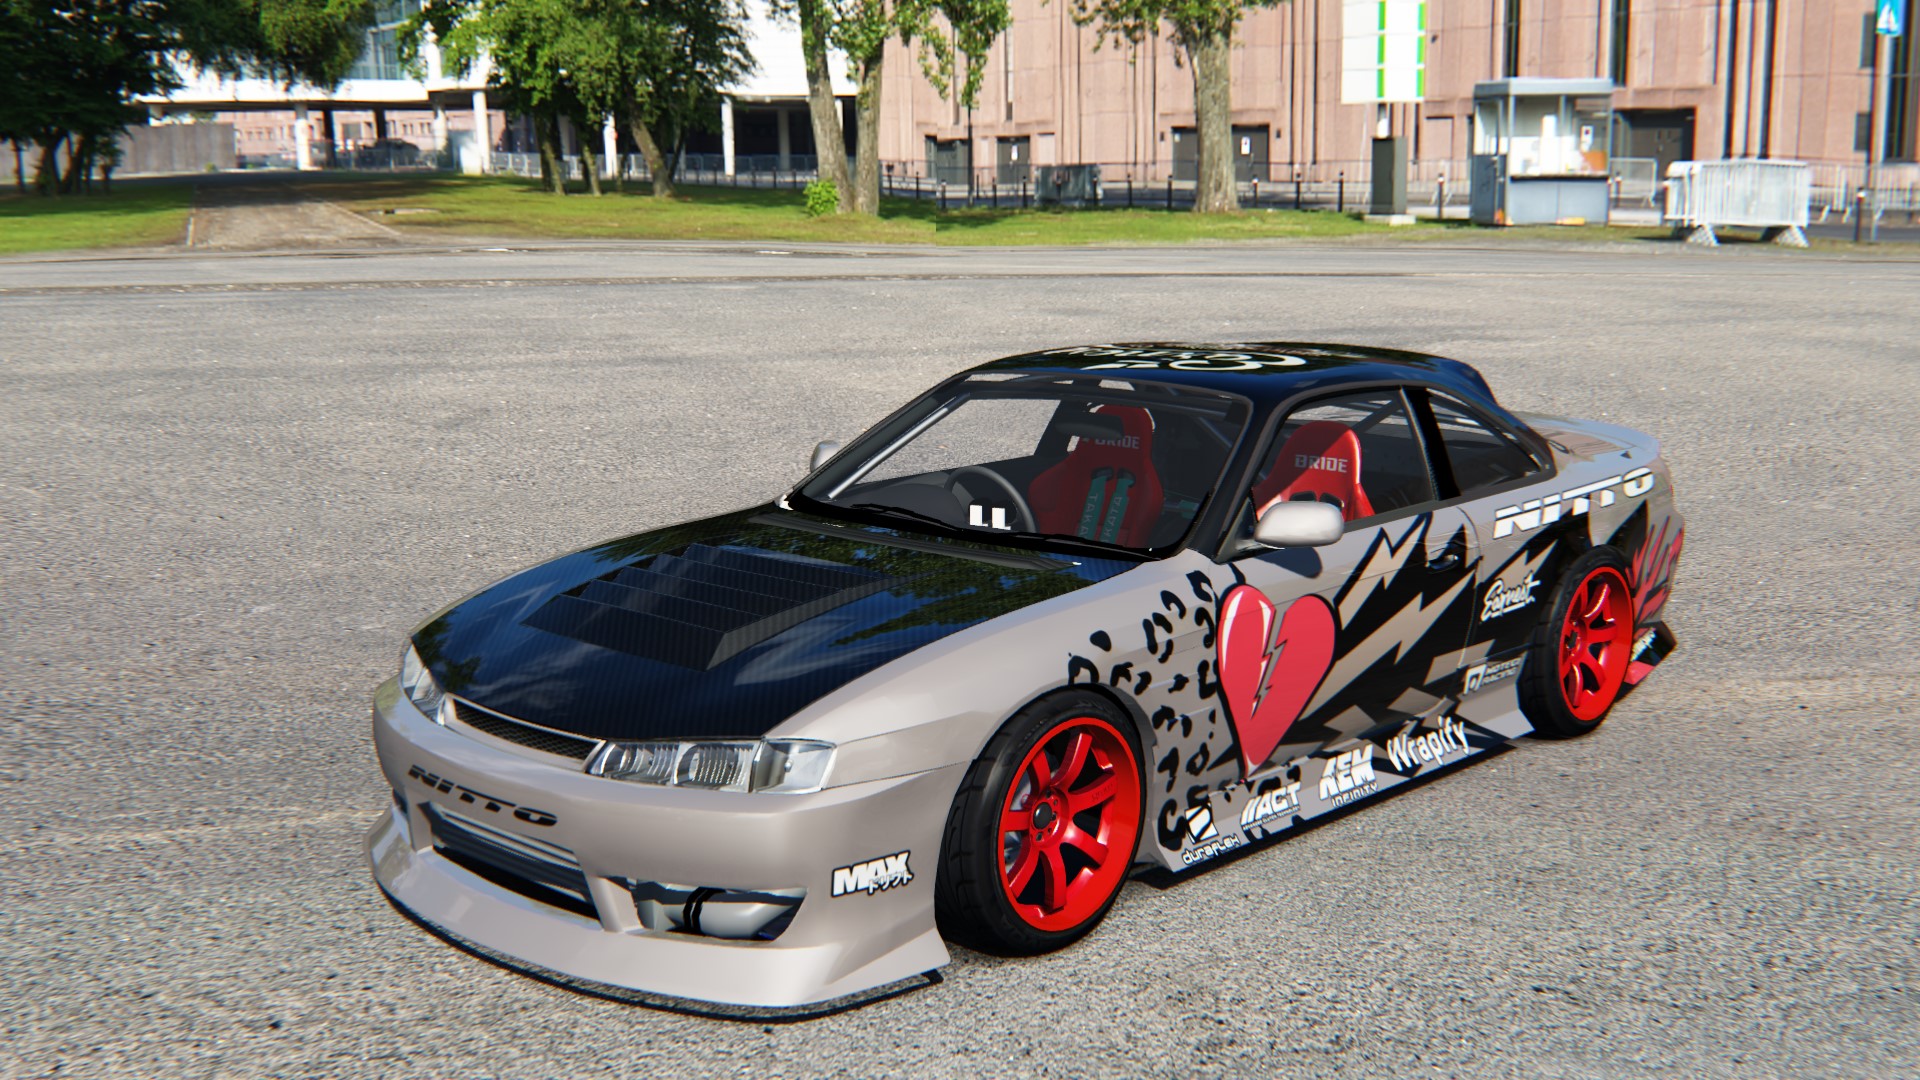 This is my 3rd Livery for the Titan Mod S14, this time I've recreated ...